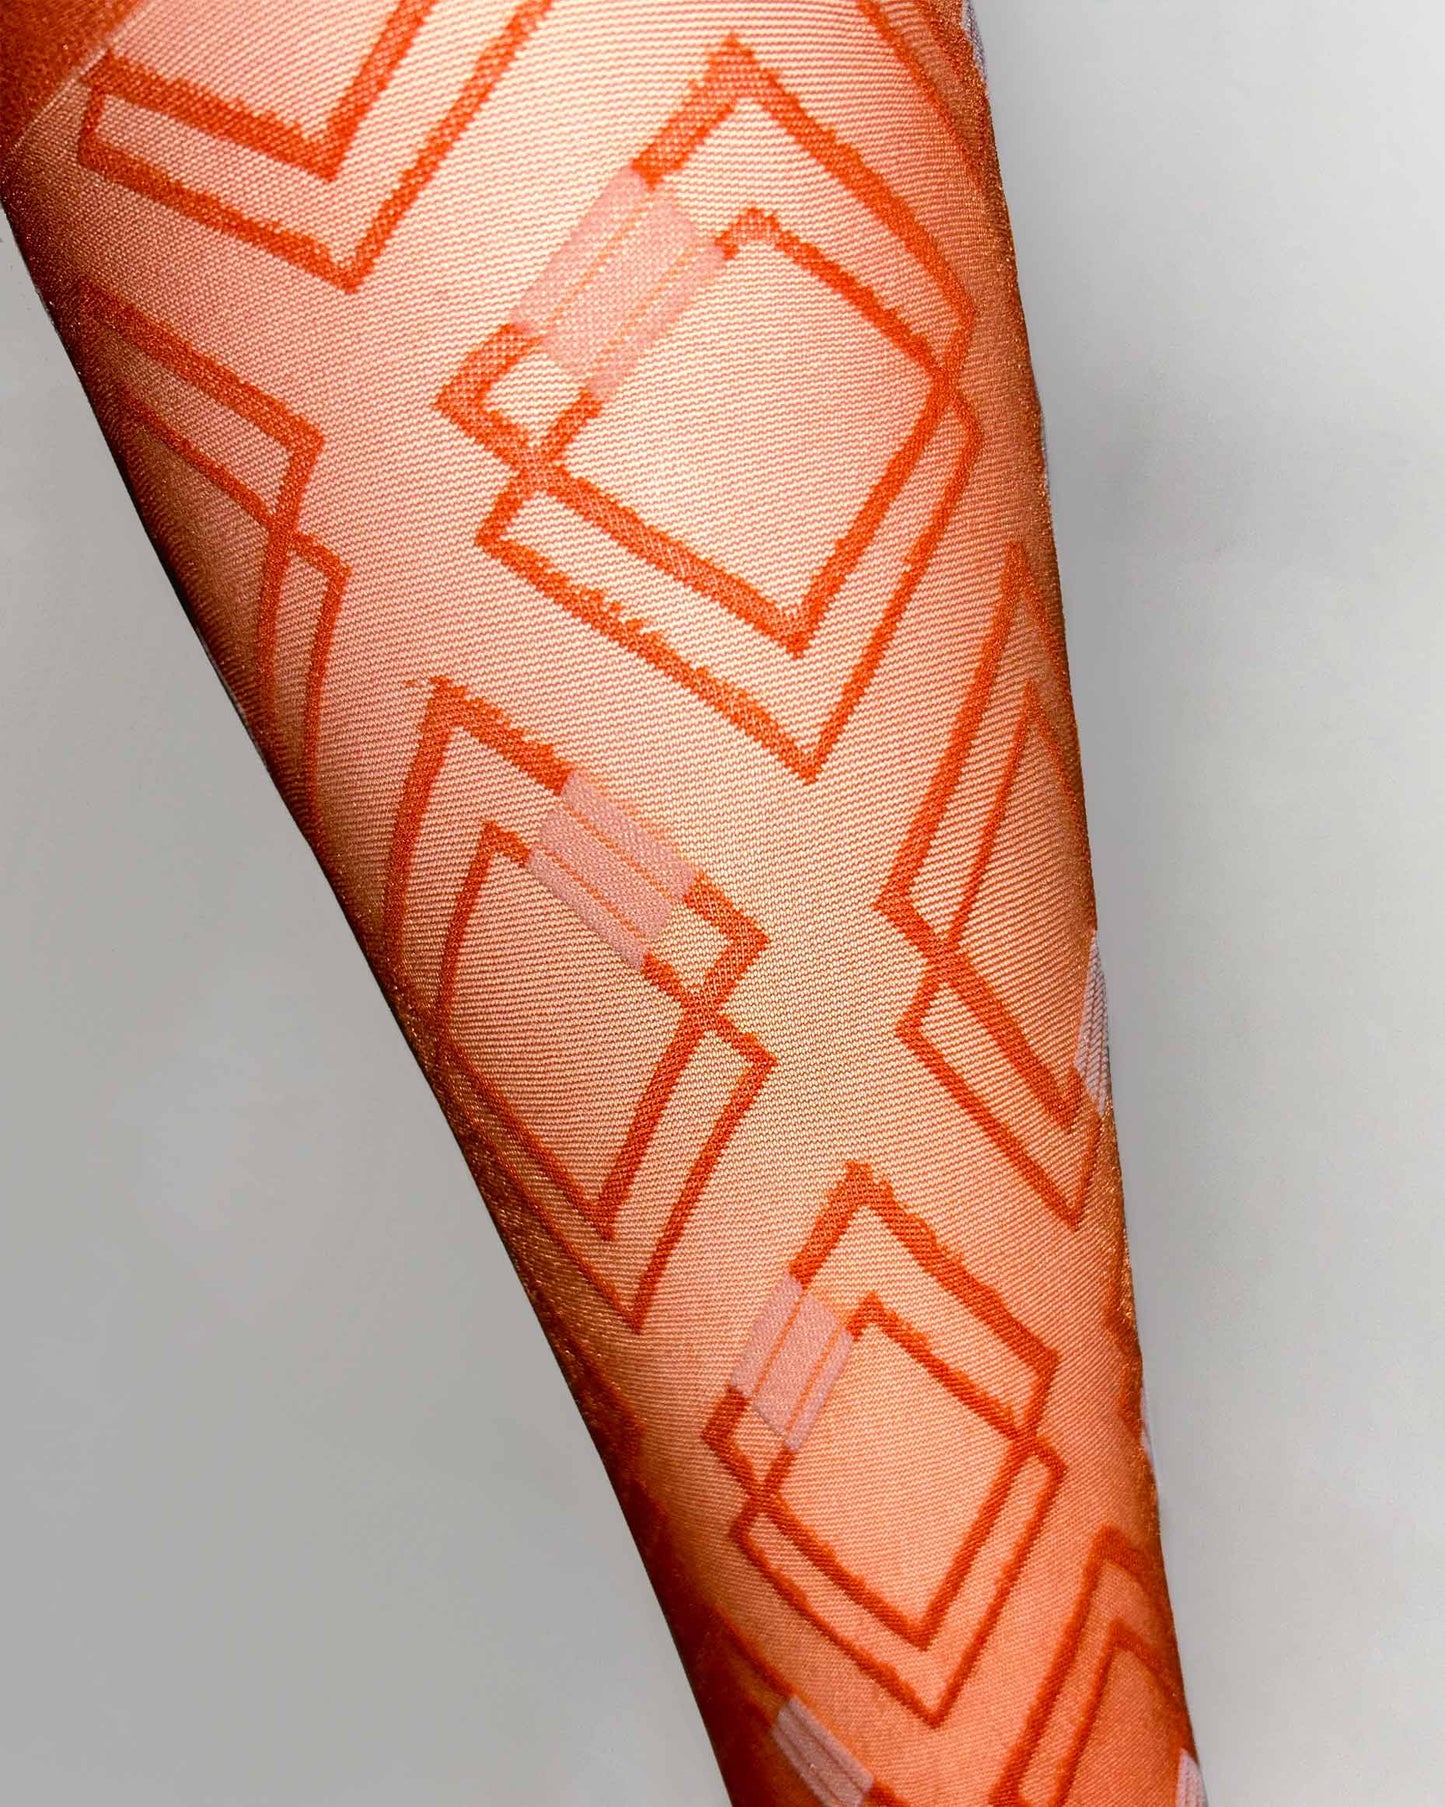 Omsa Poison Gambaletto - Sheer orange nude fashion knee-high socks with a woven geometric diamond style pattern with white square shapes and a plain comfort cuff.